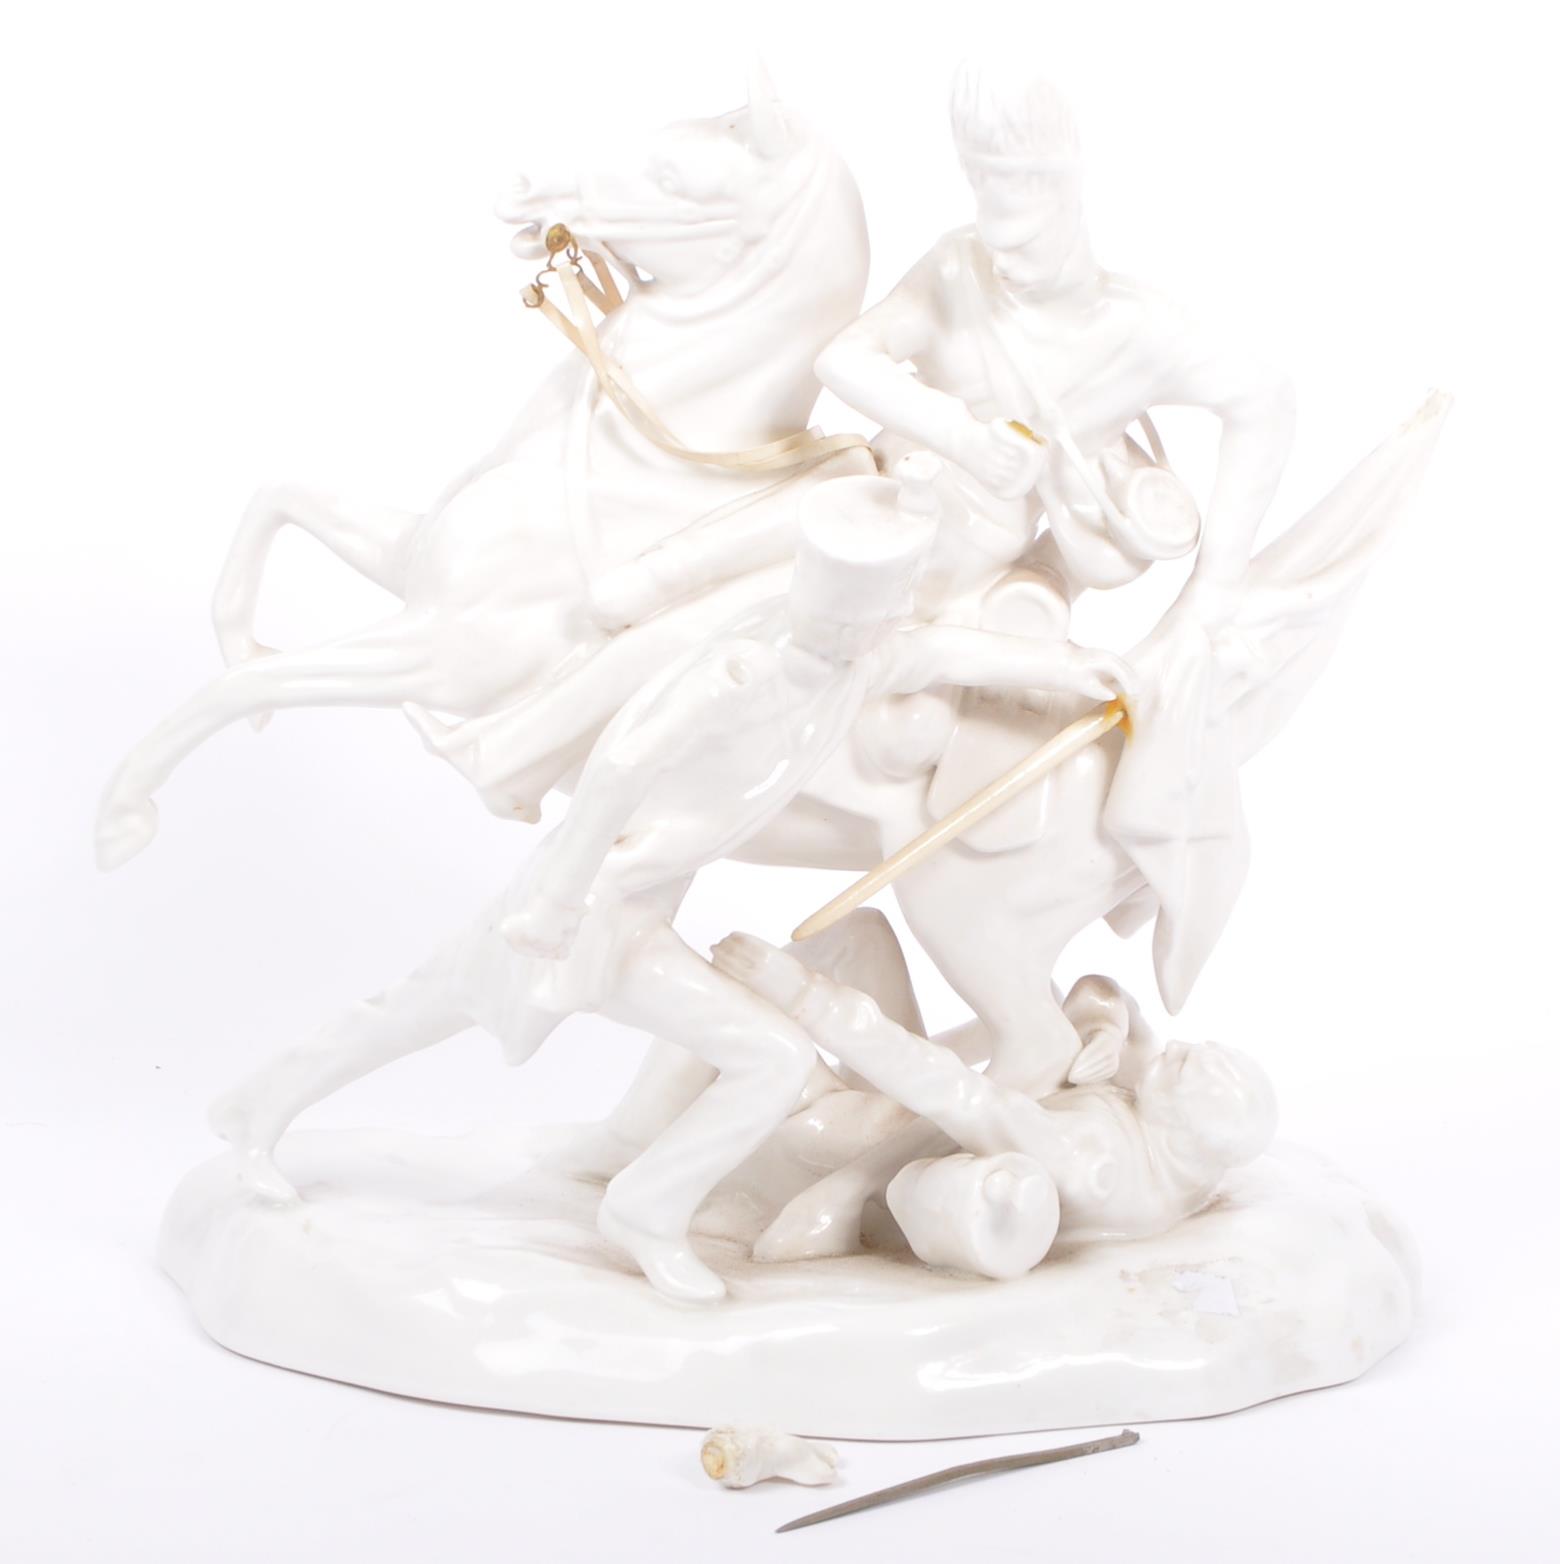 MICHEAL SUTTY PORCELAIN MILITARY FIGURE - FACTORY PROTOTYPE